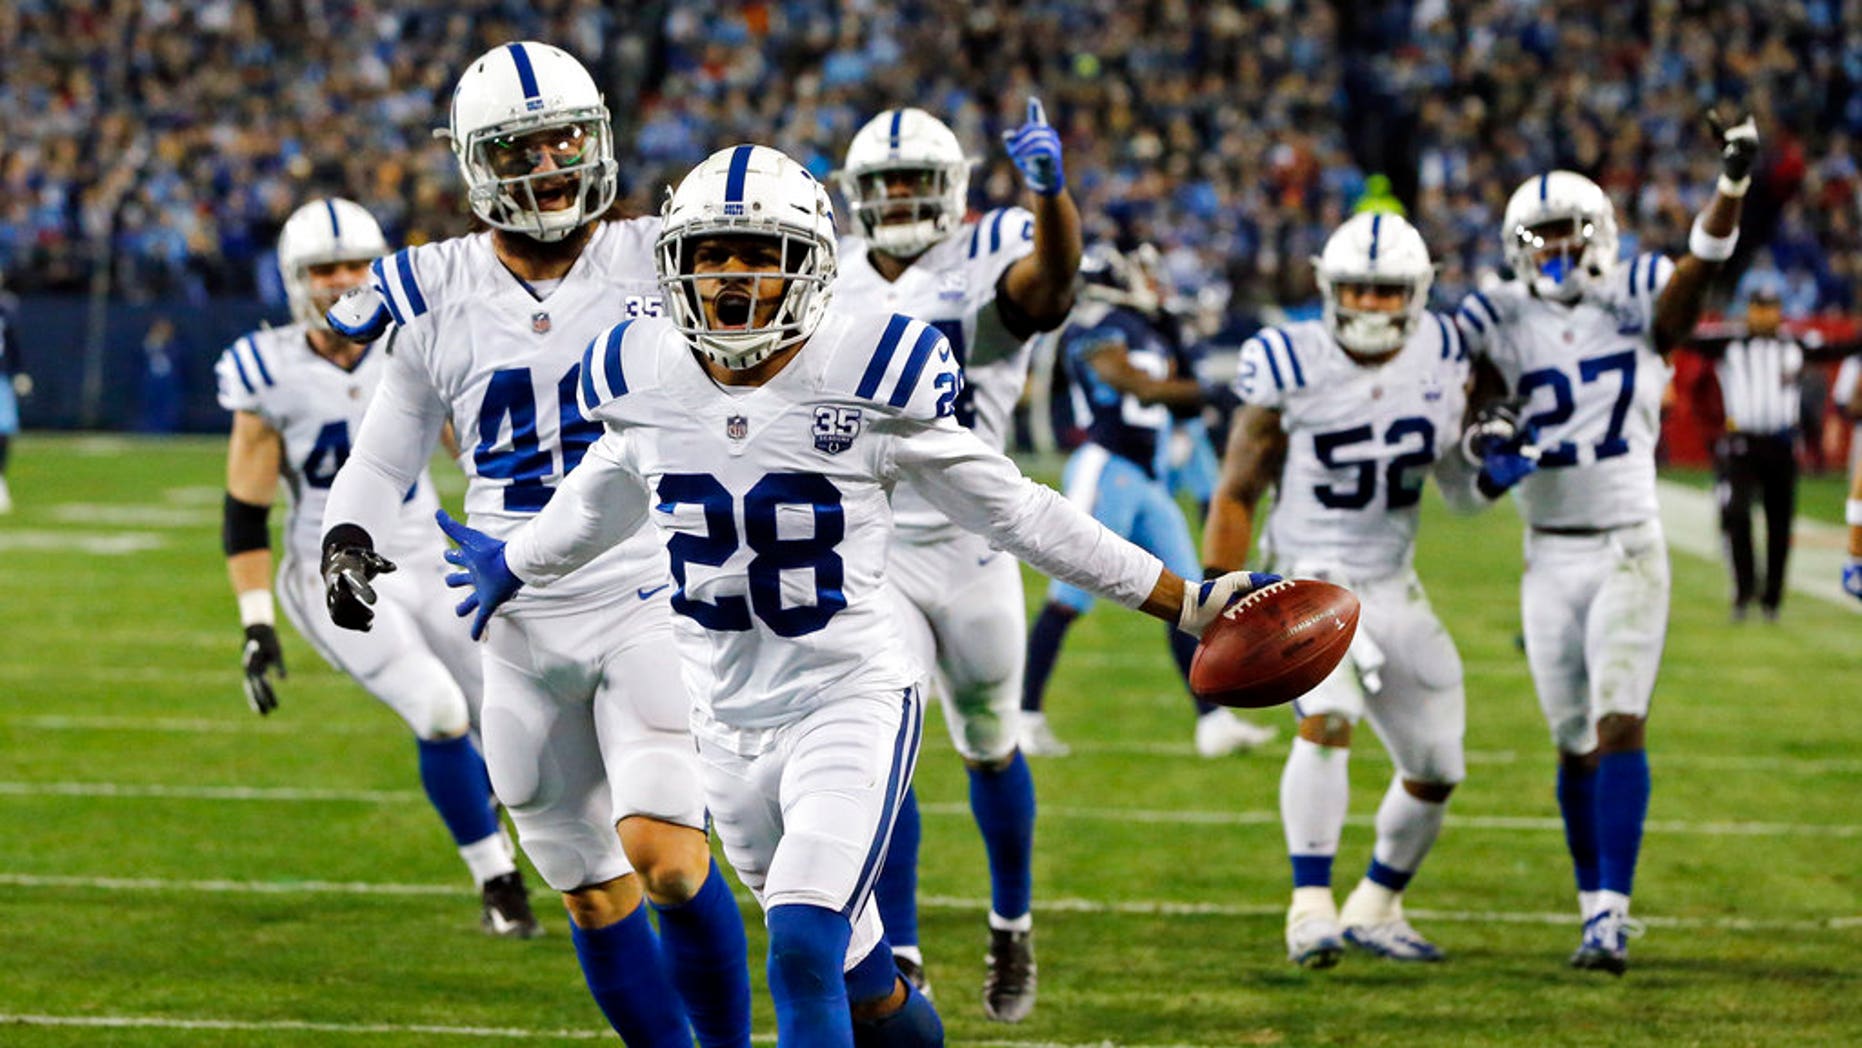 Colts defeat Titans 33-17, earn playoff spot